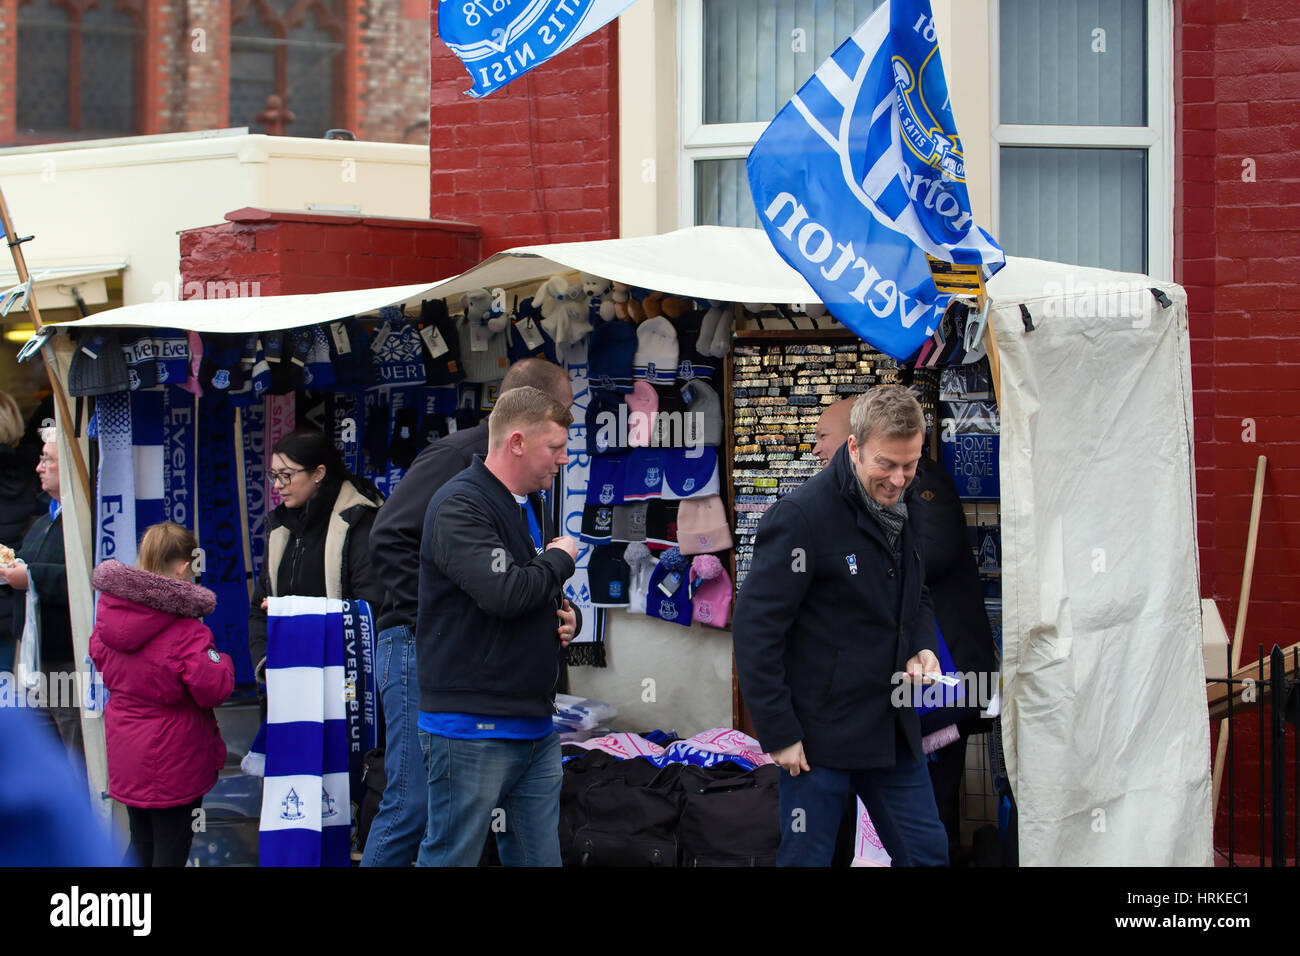 Souvenir sellers stall at Goodison Park for an Everton home game Stock Photo